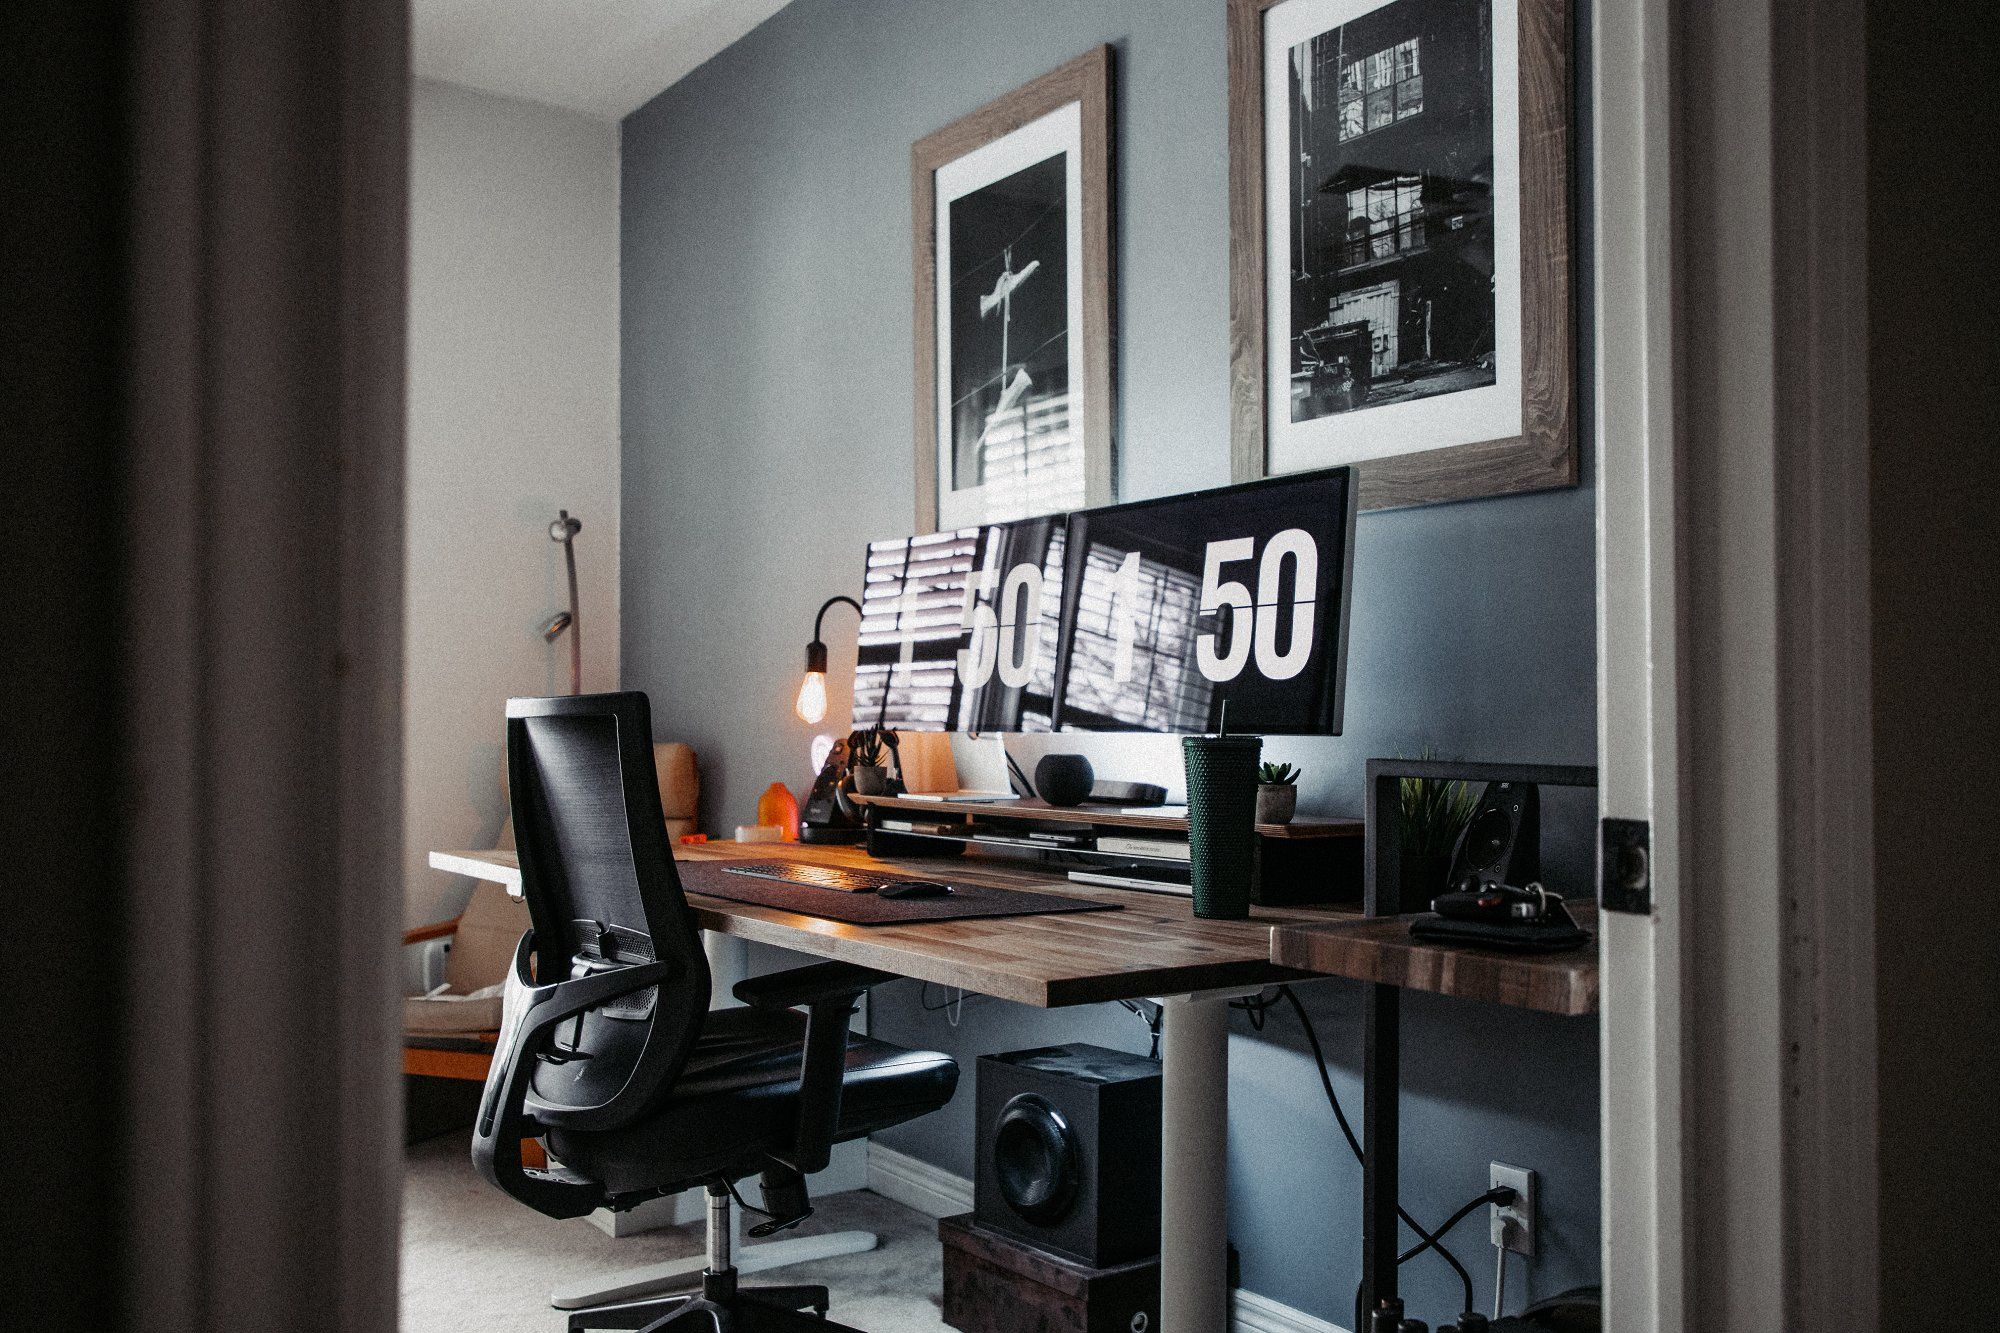 A view of a designer’s ergonomic home workspace from the right side of the doorway